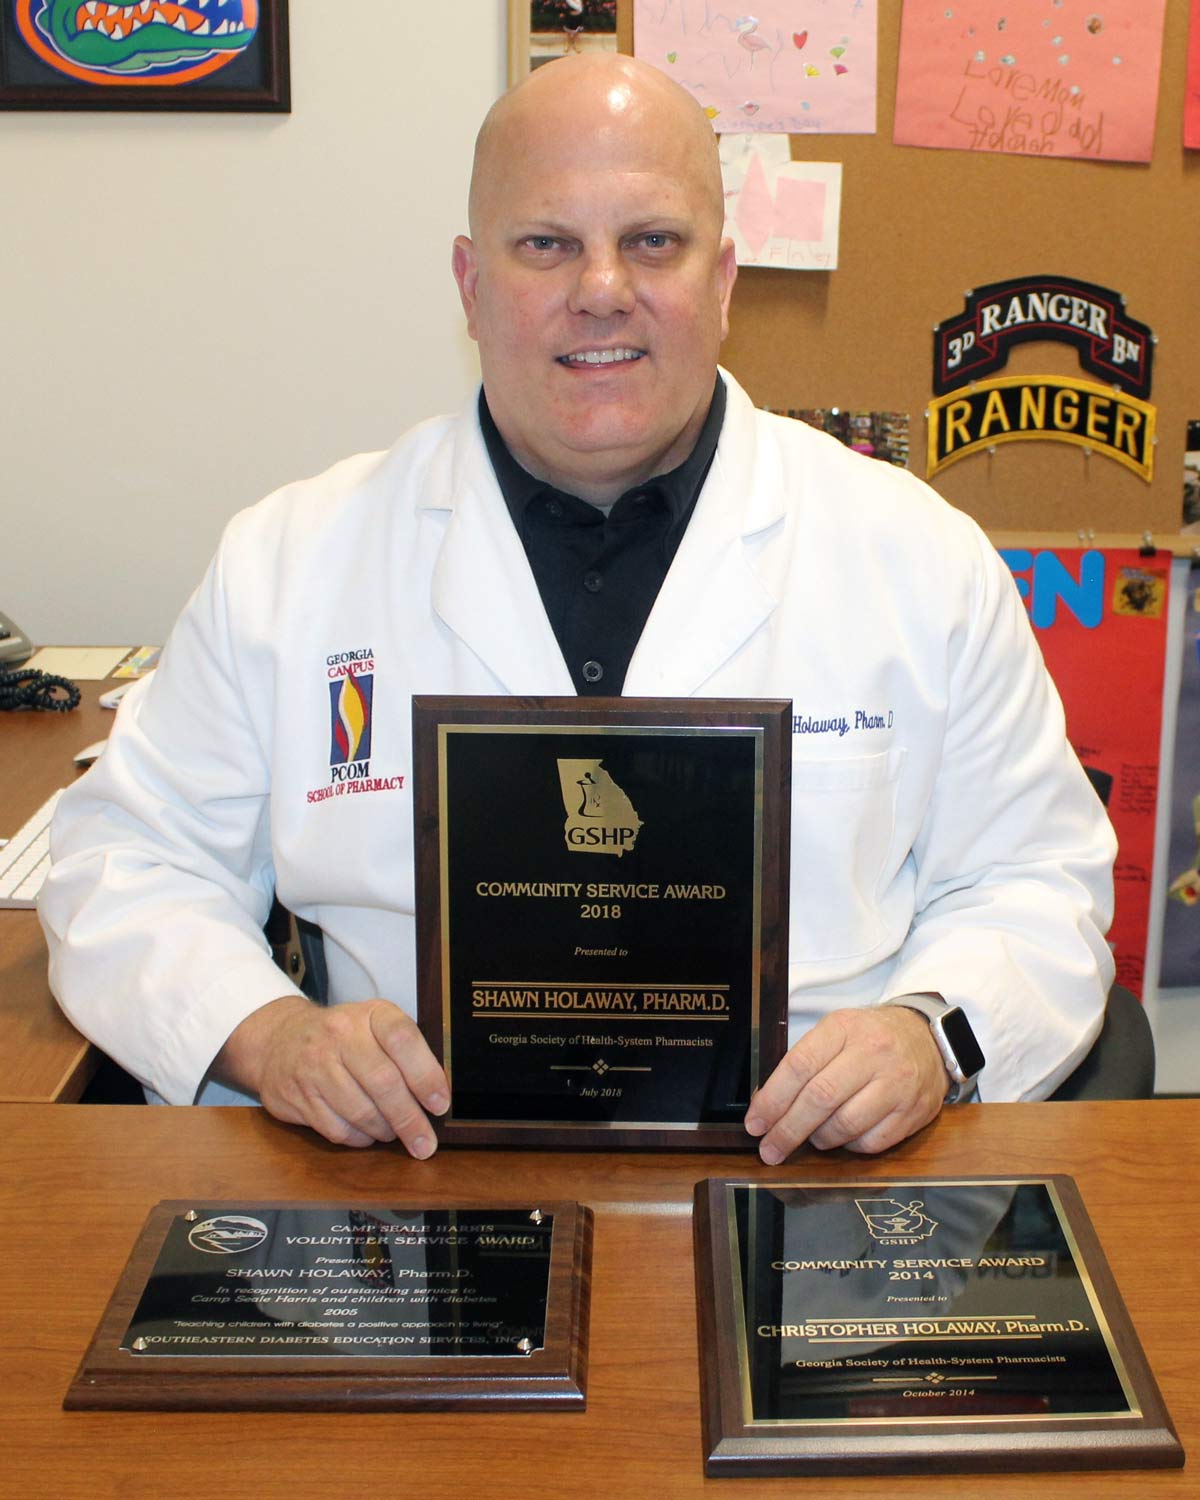 Photograph of Christopher Holaway, PharmD, at his office desk holding his community service award.